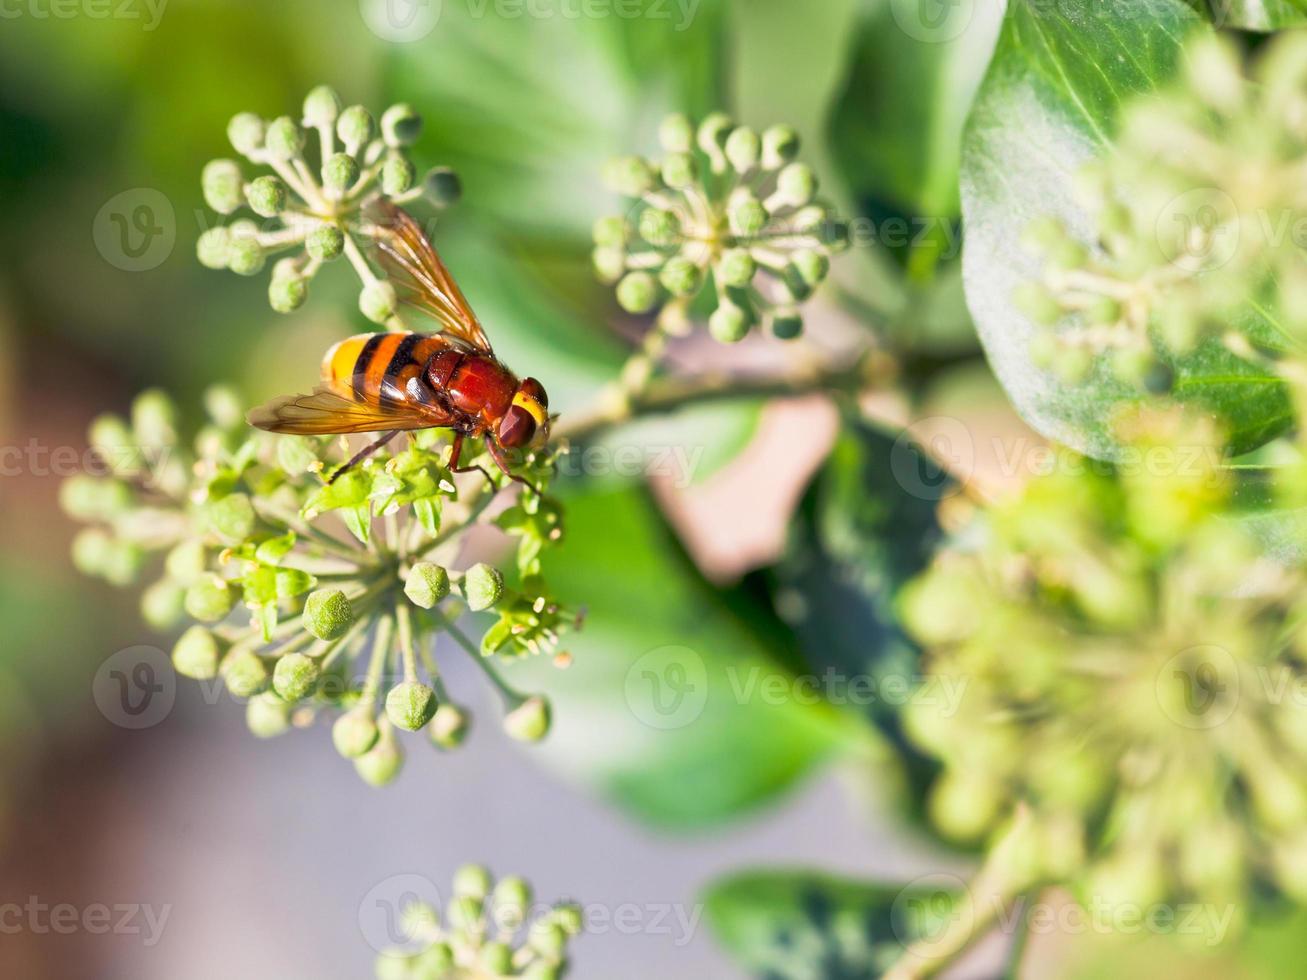 flower fly volucella inanis on blossoms of ivy photo